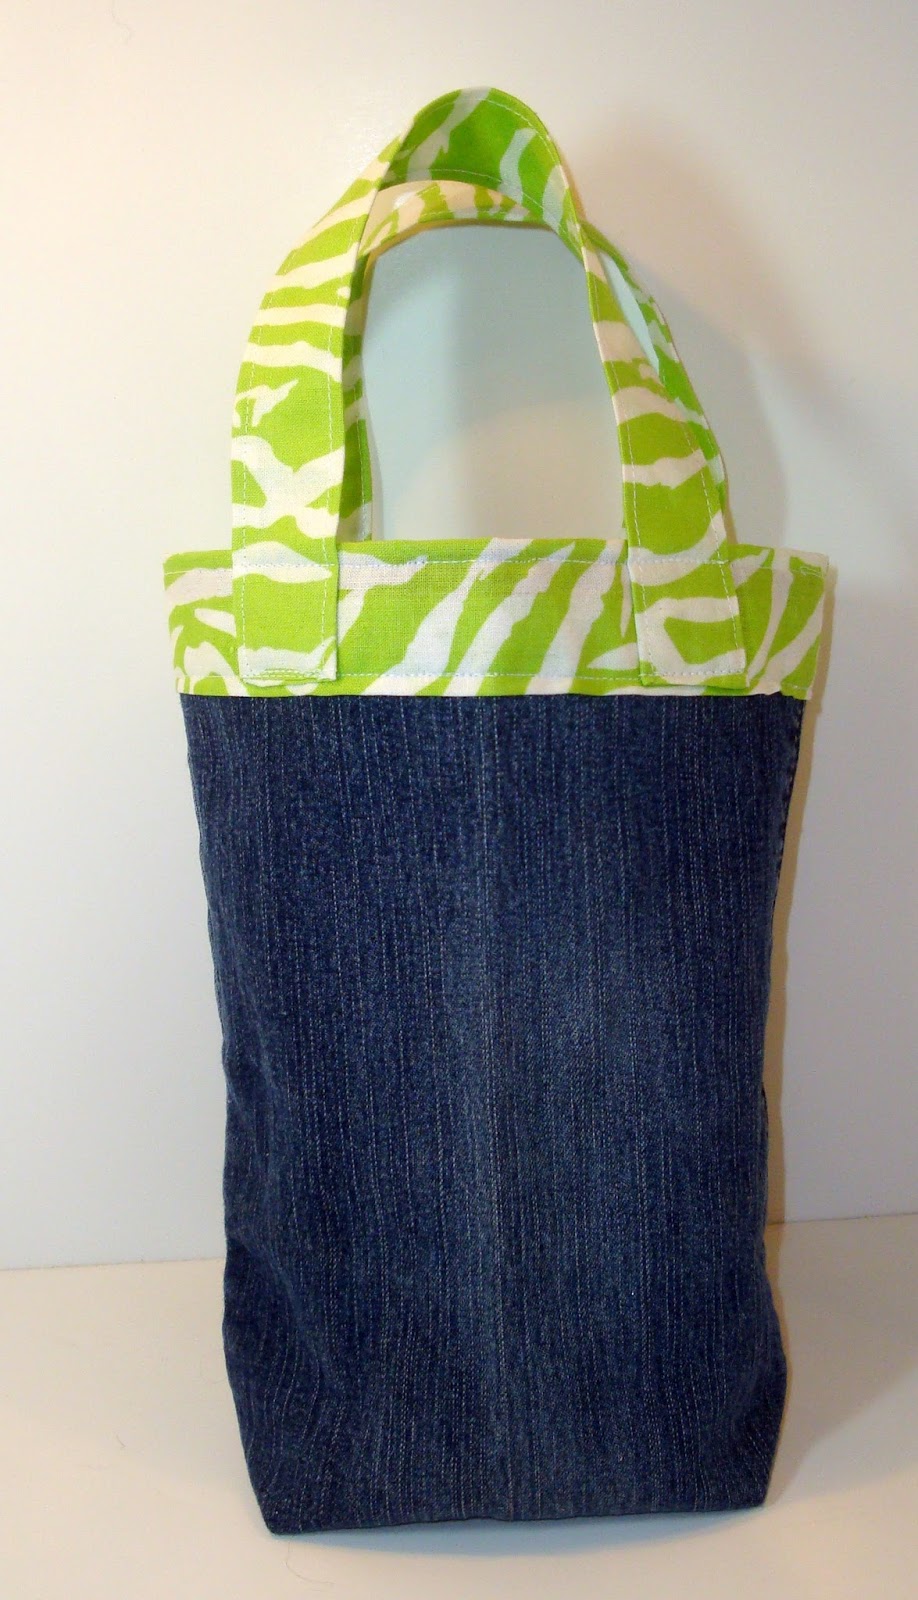 Everyday Art Work: Upcycled Denim Blue Jeans Carry Sack - Tote - Purse